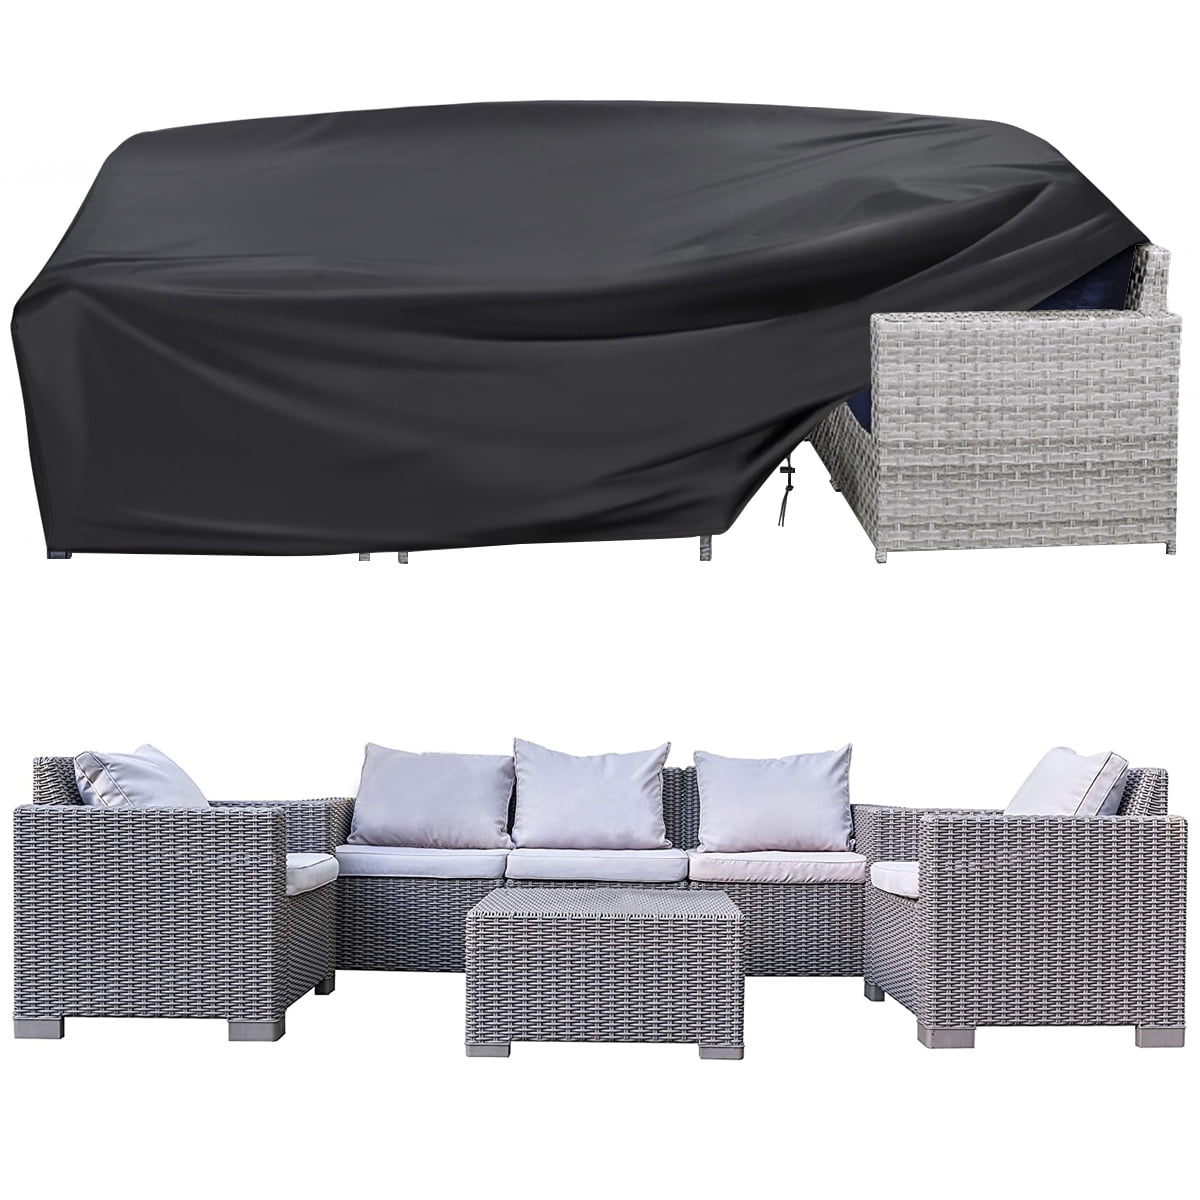 Large Garden Rattan Outdoor Furniture Cover Patio Table Protection Cube Sofa UK 